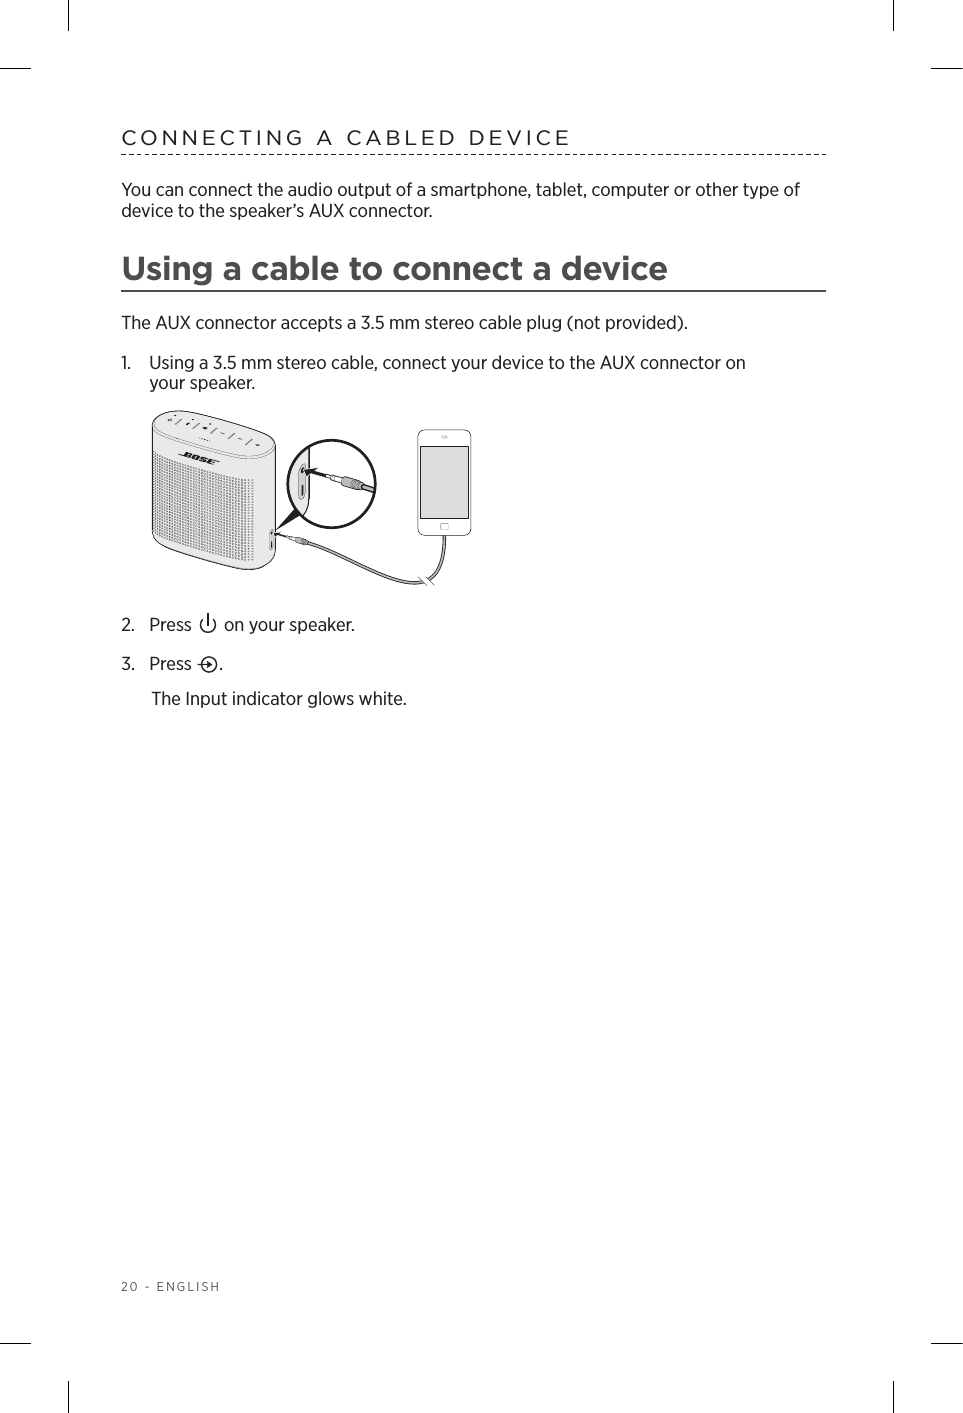 20 - ENGLISHCONNECTING A CABLED DEVICEYou can connect the audio output of a smartphone, tablet, computer or other type of device to the speaker’s AUX connector. Using a cable to connect a deviceThe AUX connector accepts a 3.5 mm stereo cable plug (not provided).1.  Using a 3.5 mm stereo cable, connect your device to the AUX connector on  your speaker.2.  Press   on your speaker.3.  Press  . The Input indicator glows white.